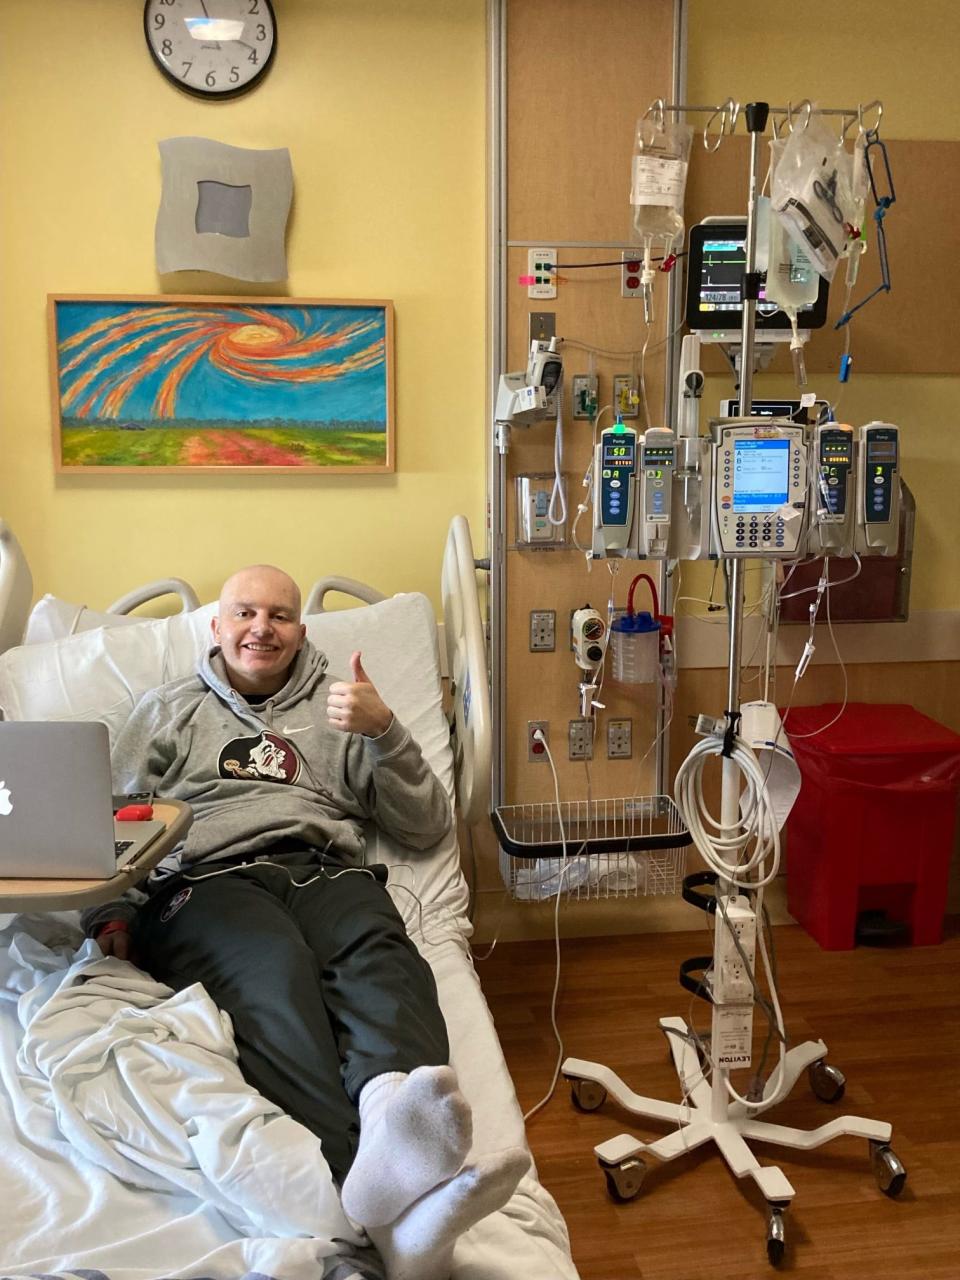 Former Florida State graduate assistant Jared Lynn, who is now in remission after being diagnosed with stage four non-Hodgkin lymphoma cancer in February, poses for a picture in a hospital bed.